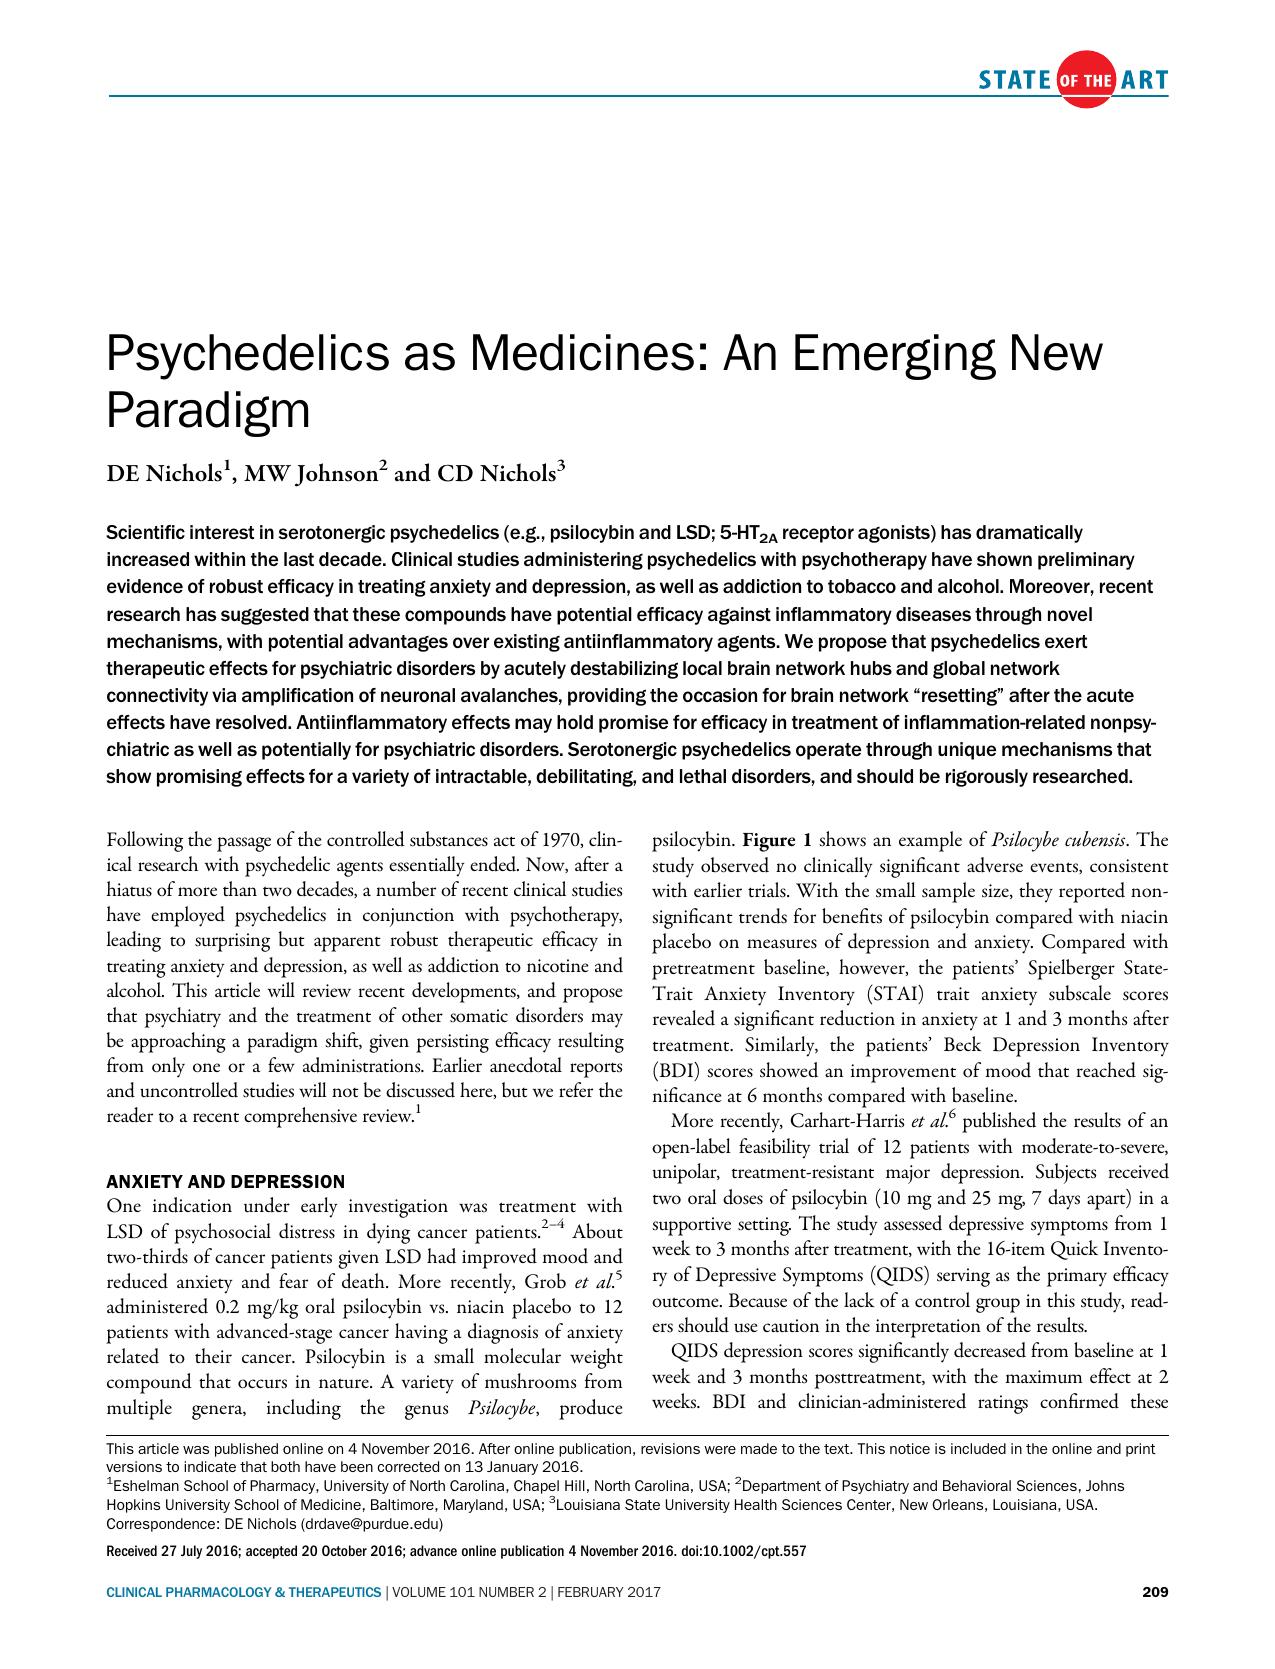 Psychedelics as Medicines: An Emerging New Paradigm